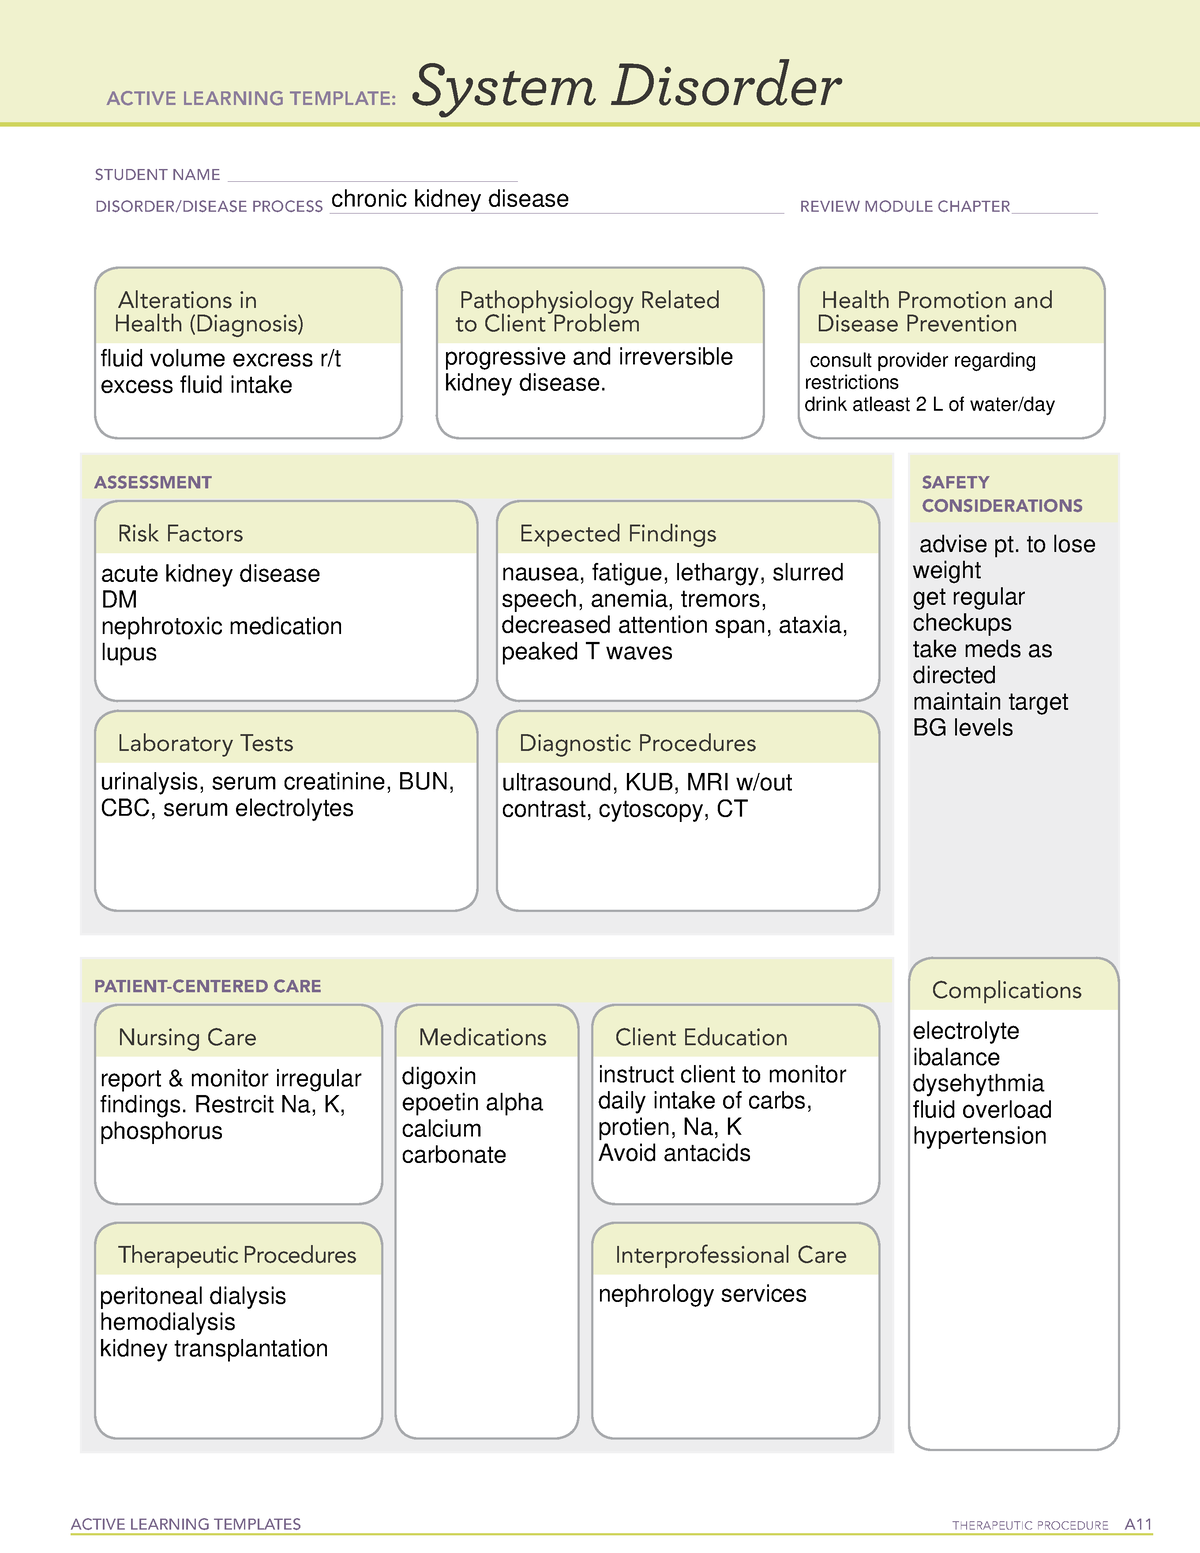 Ckd Chronic kidney disease active learning template ati ACTIVE